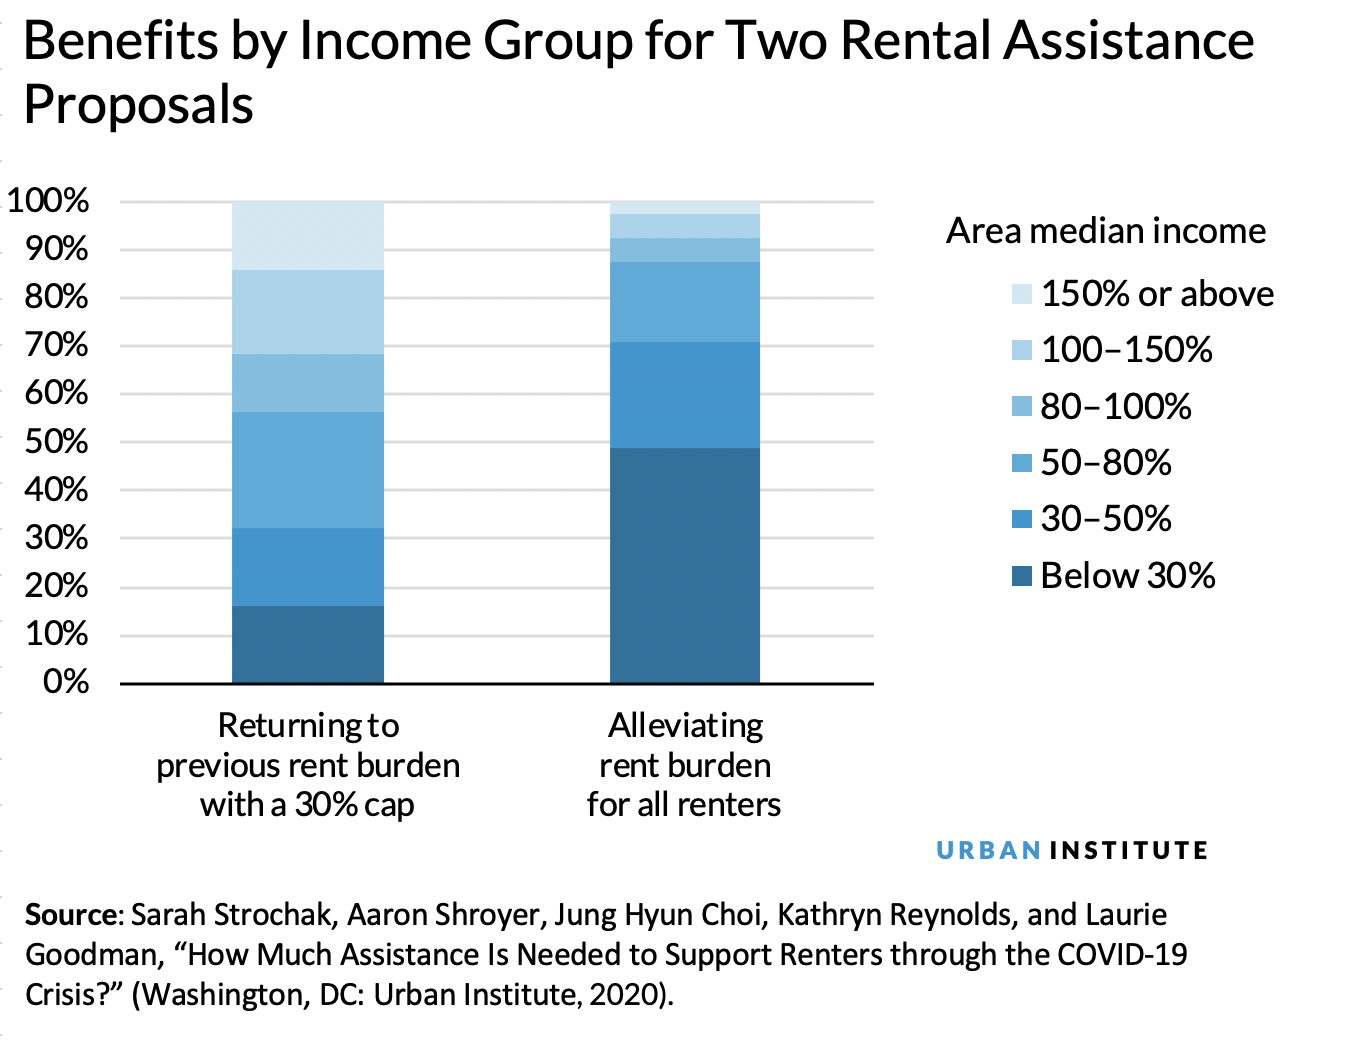 Benefits by income group for rental assistance proposals